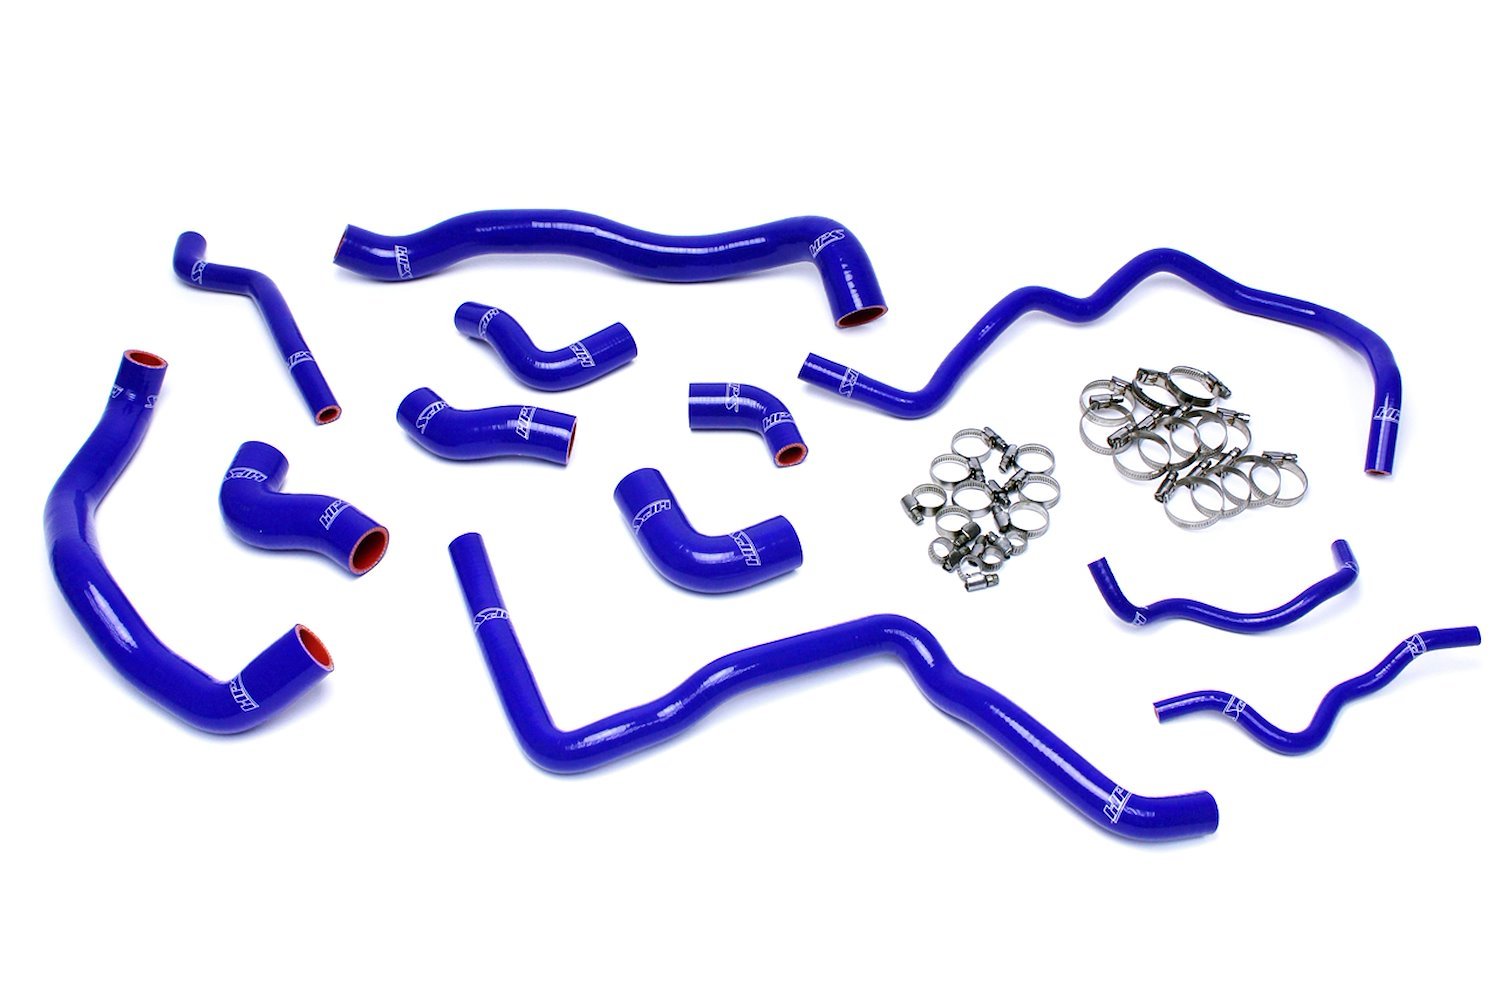 57-1476-BLUE Coolant Hose Kit, 3-Ply Reinforced Silicone, Replaces Rubber Radiator & Ancillary Coolant Hoses